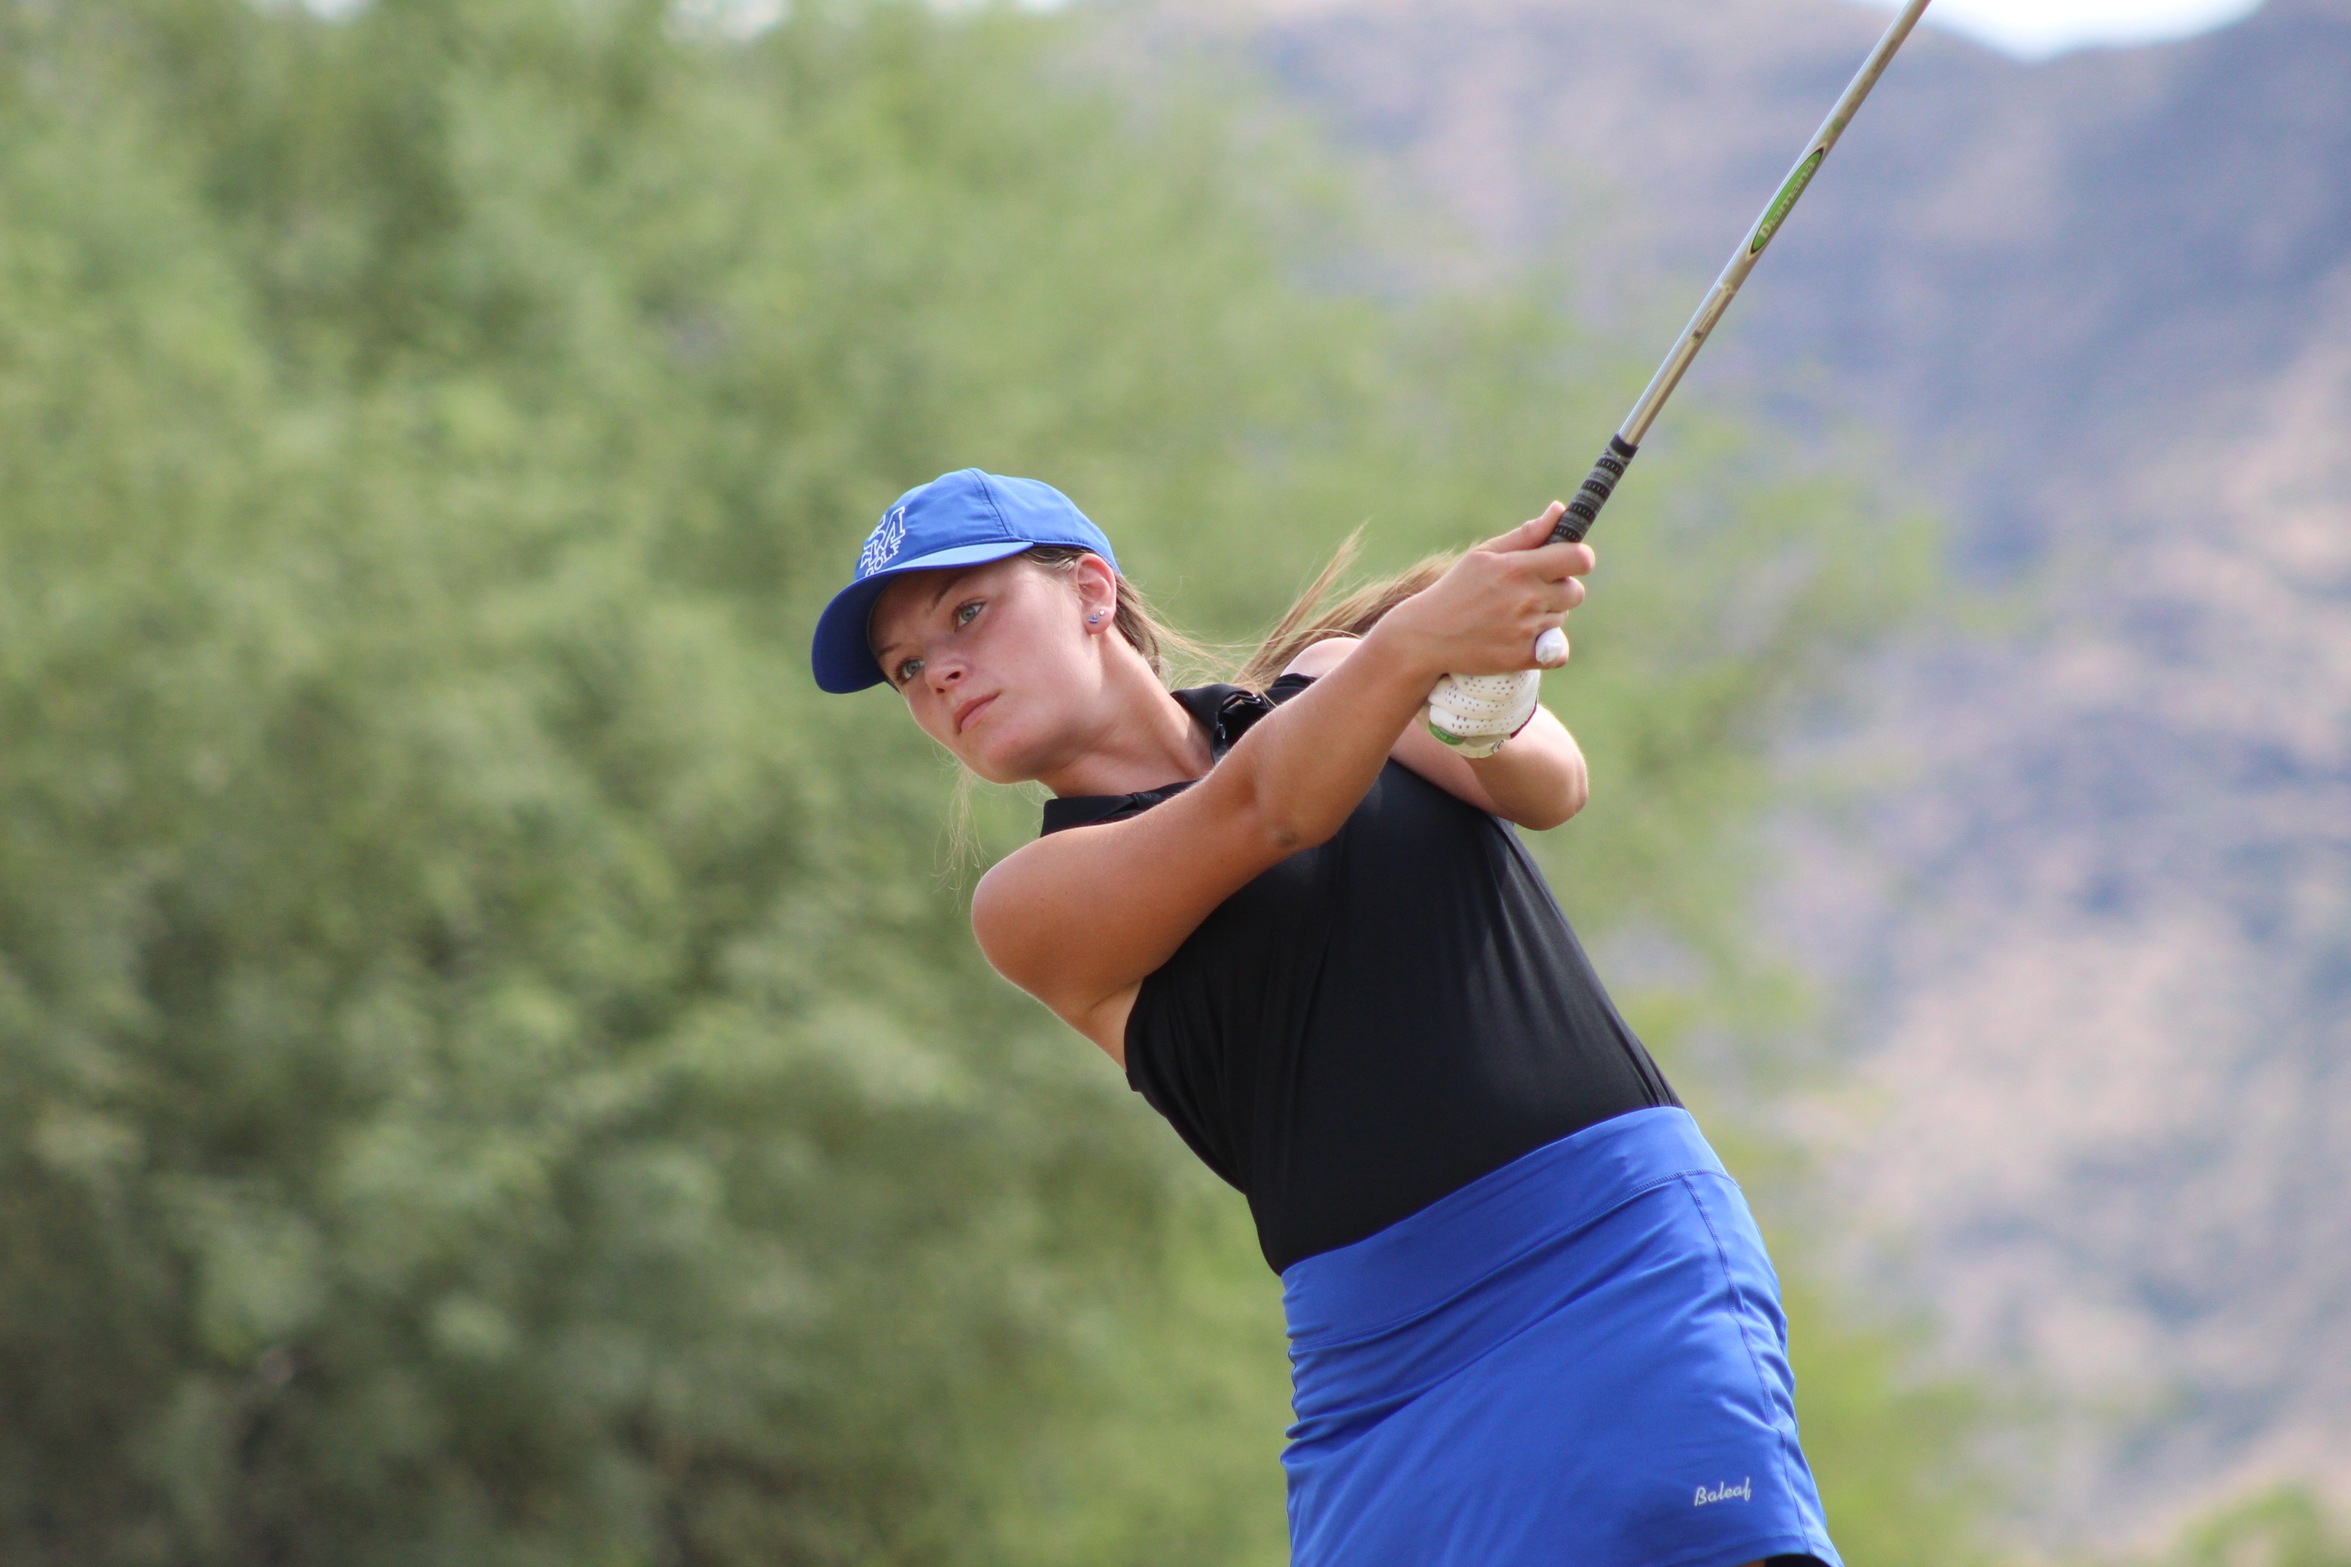 SMCC Women's Golf Wins Duel with Pima CC to Conclude 2021 Fall Season